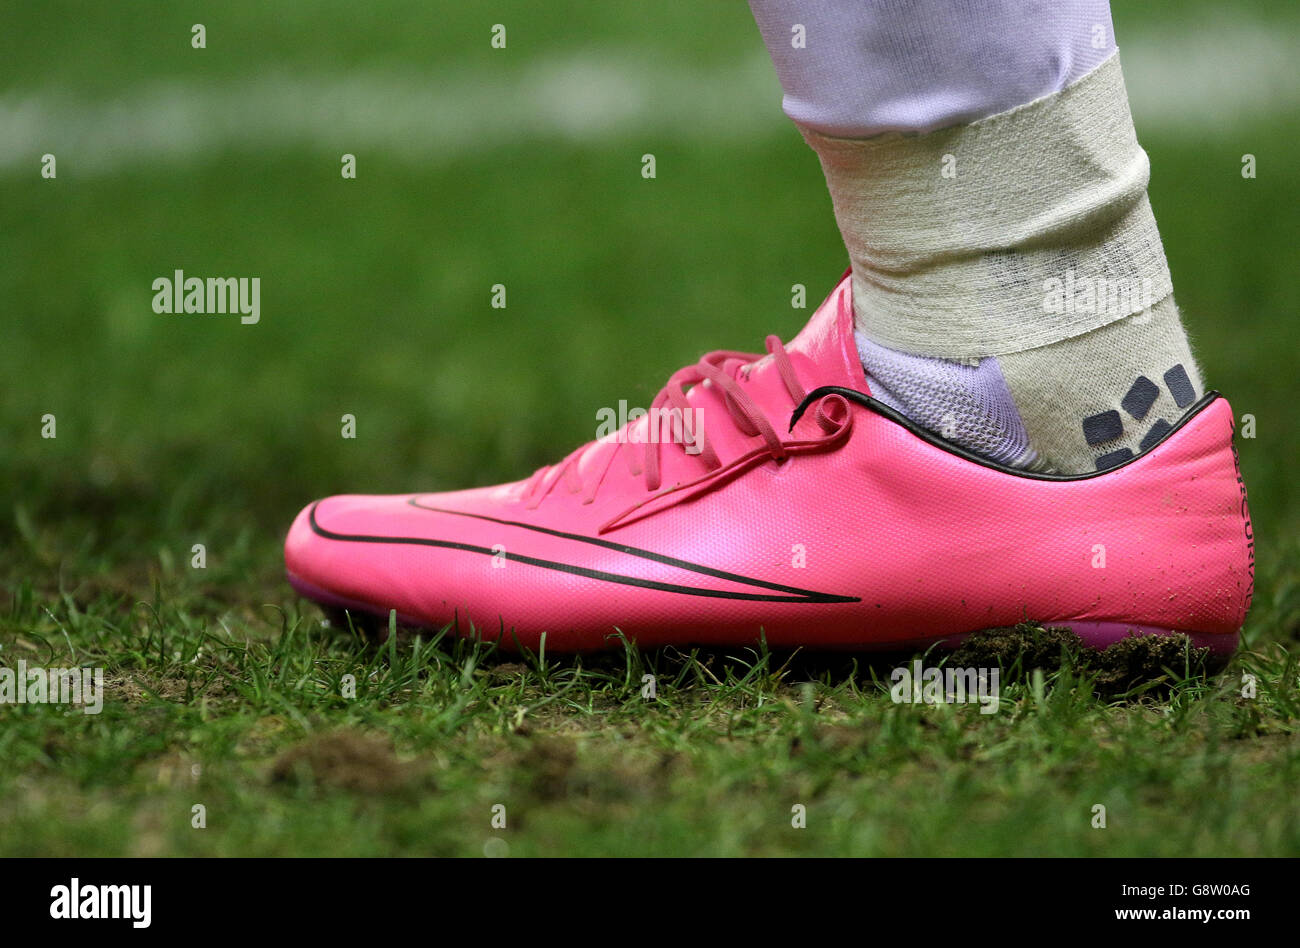 Page 2 - Nike Stadium High Resolution Stock Photography and Images - Alamy